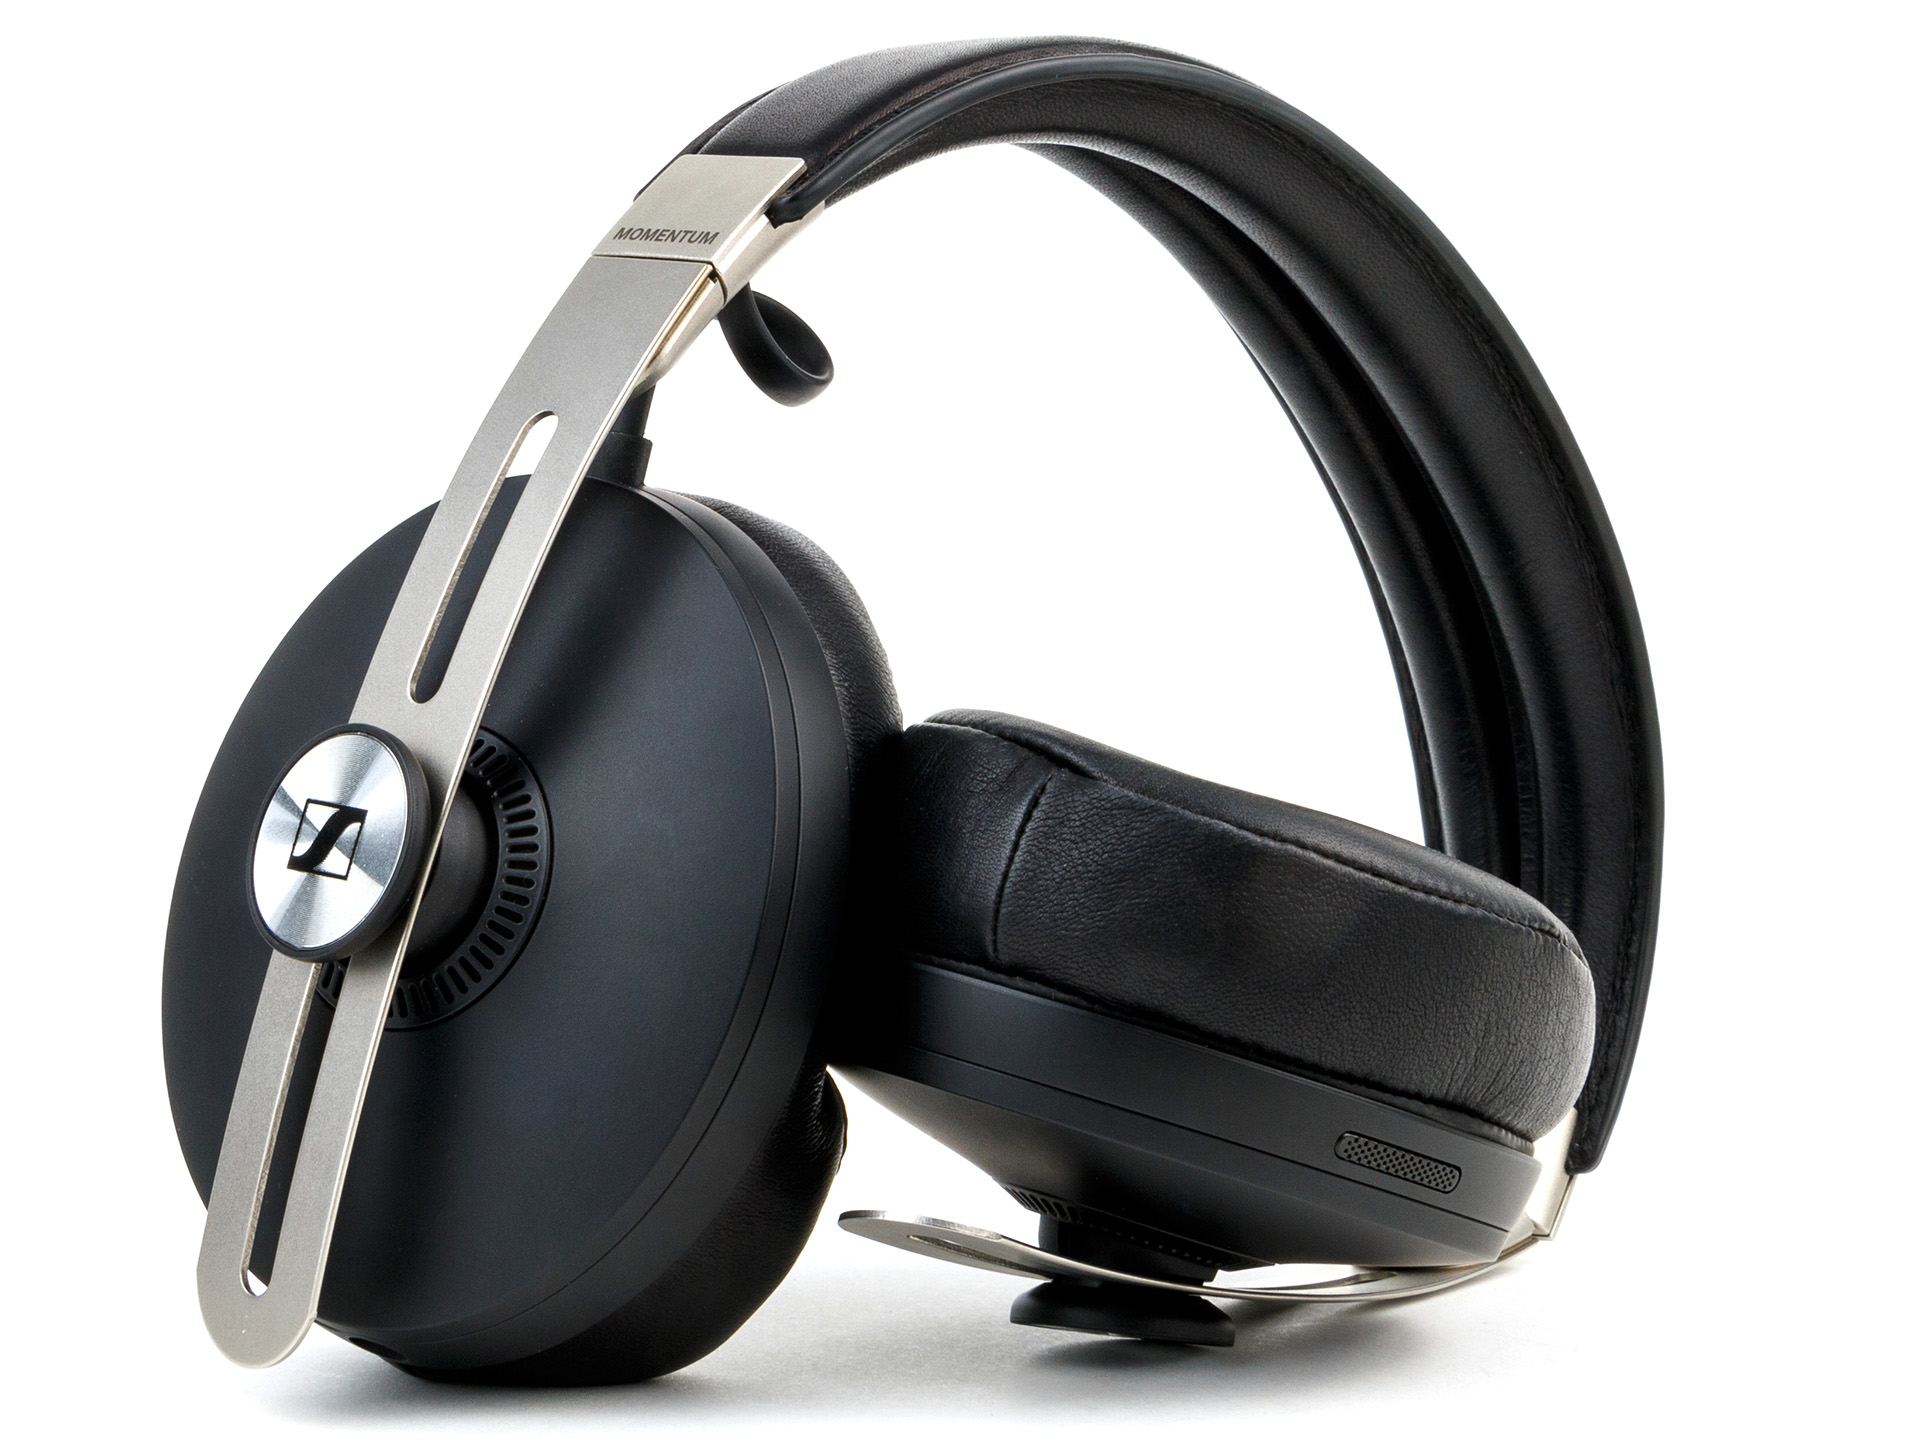 Sennheiser Momentum 3 Wireless Review - Strong ANC headphones with good